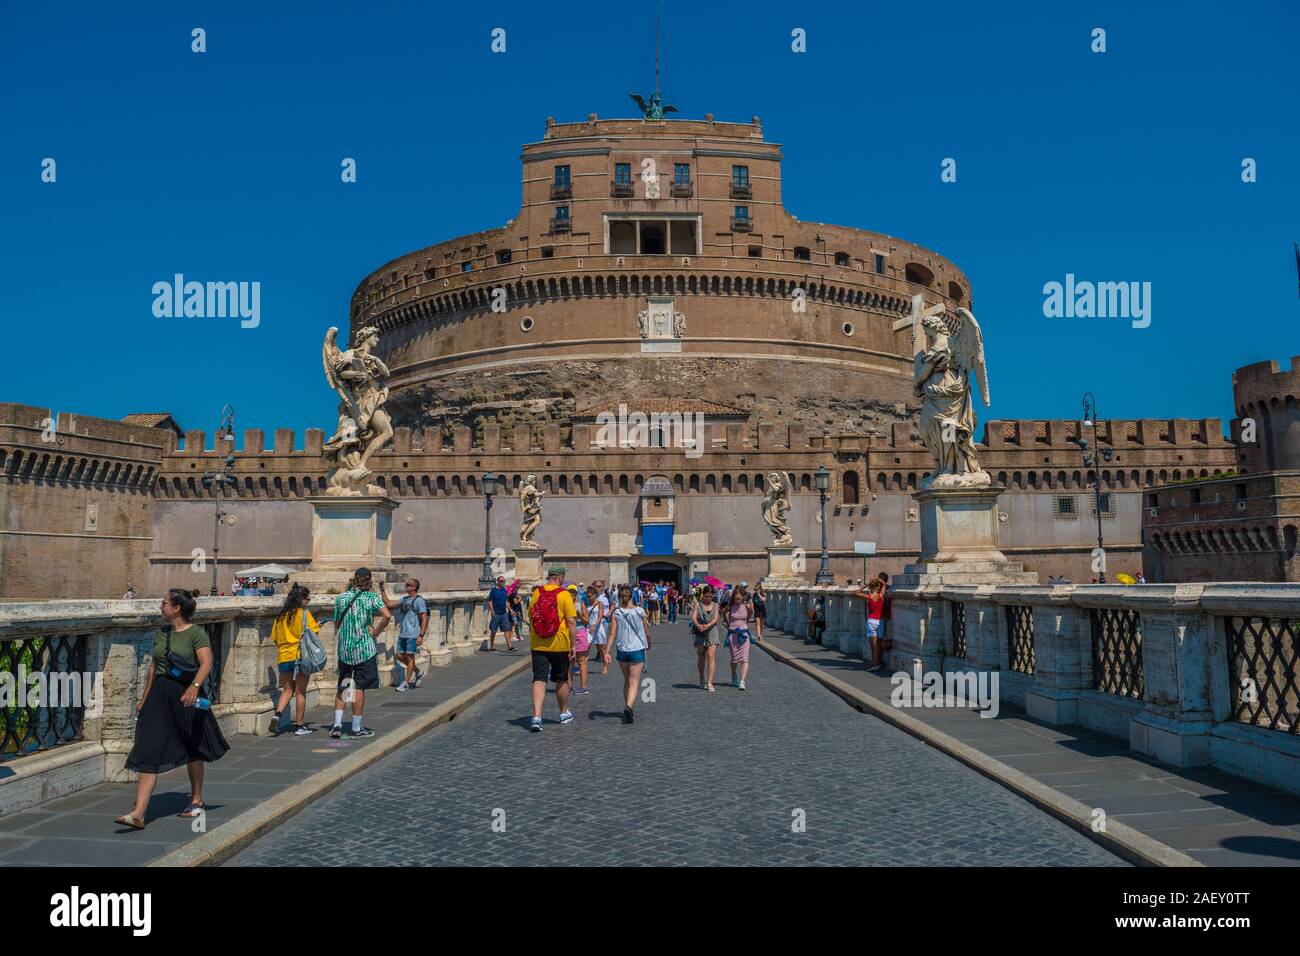 The Mausoleum of Hadrian, usually known as Castle Sant'Angelo, is a towering cylindrical building in Parco Adriano, Rome, Italy. It was initially comm Stock Photo